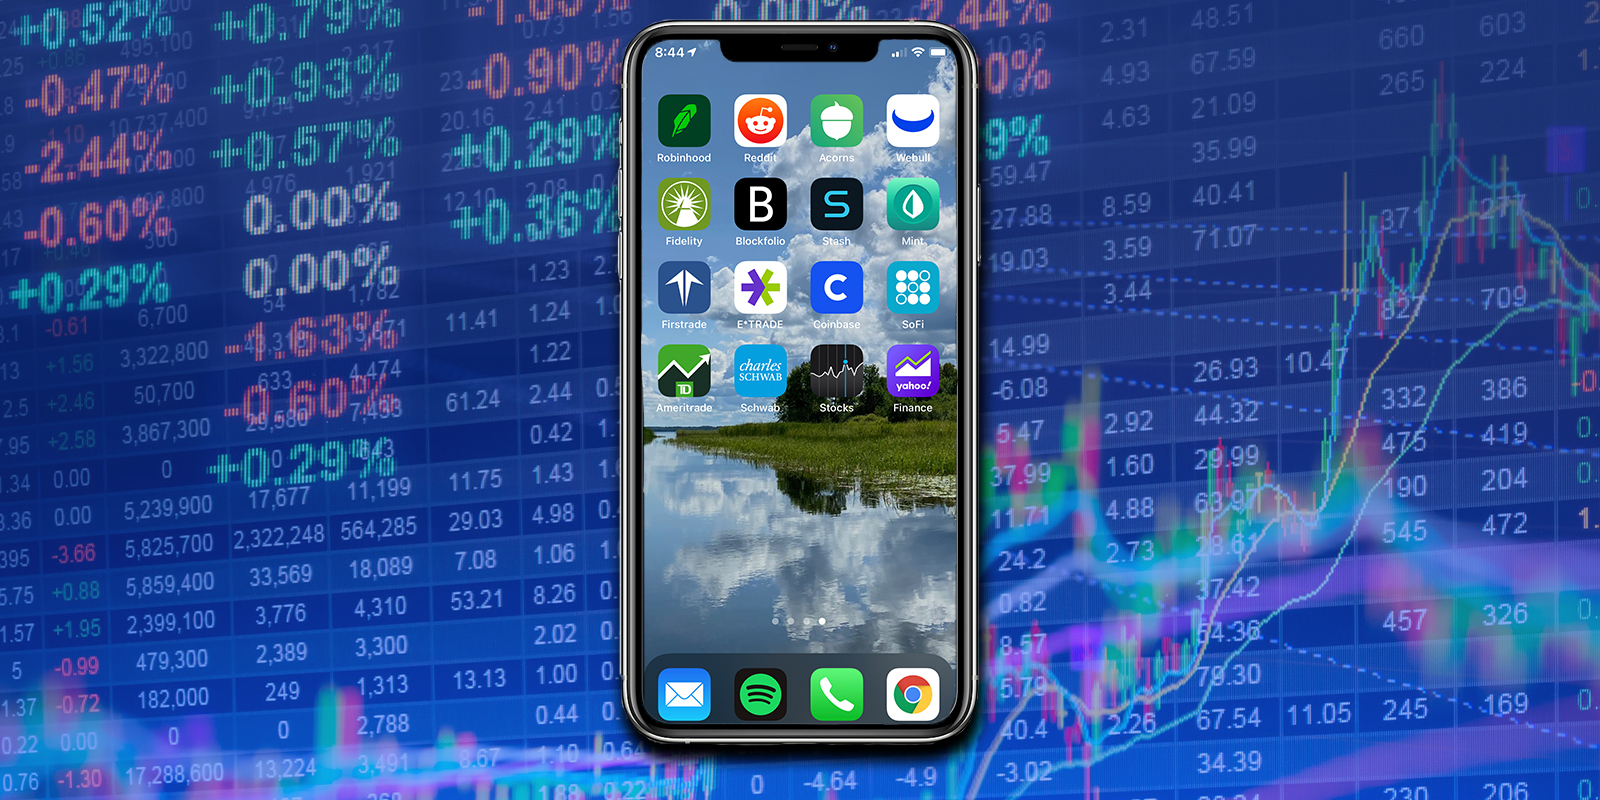 5 best stock trading apps for iPhone 9to5Mac